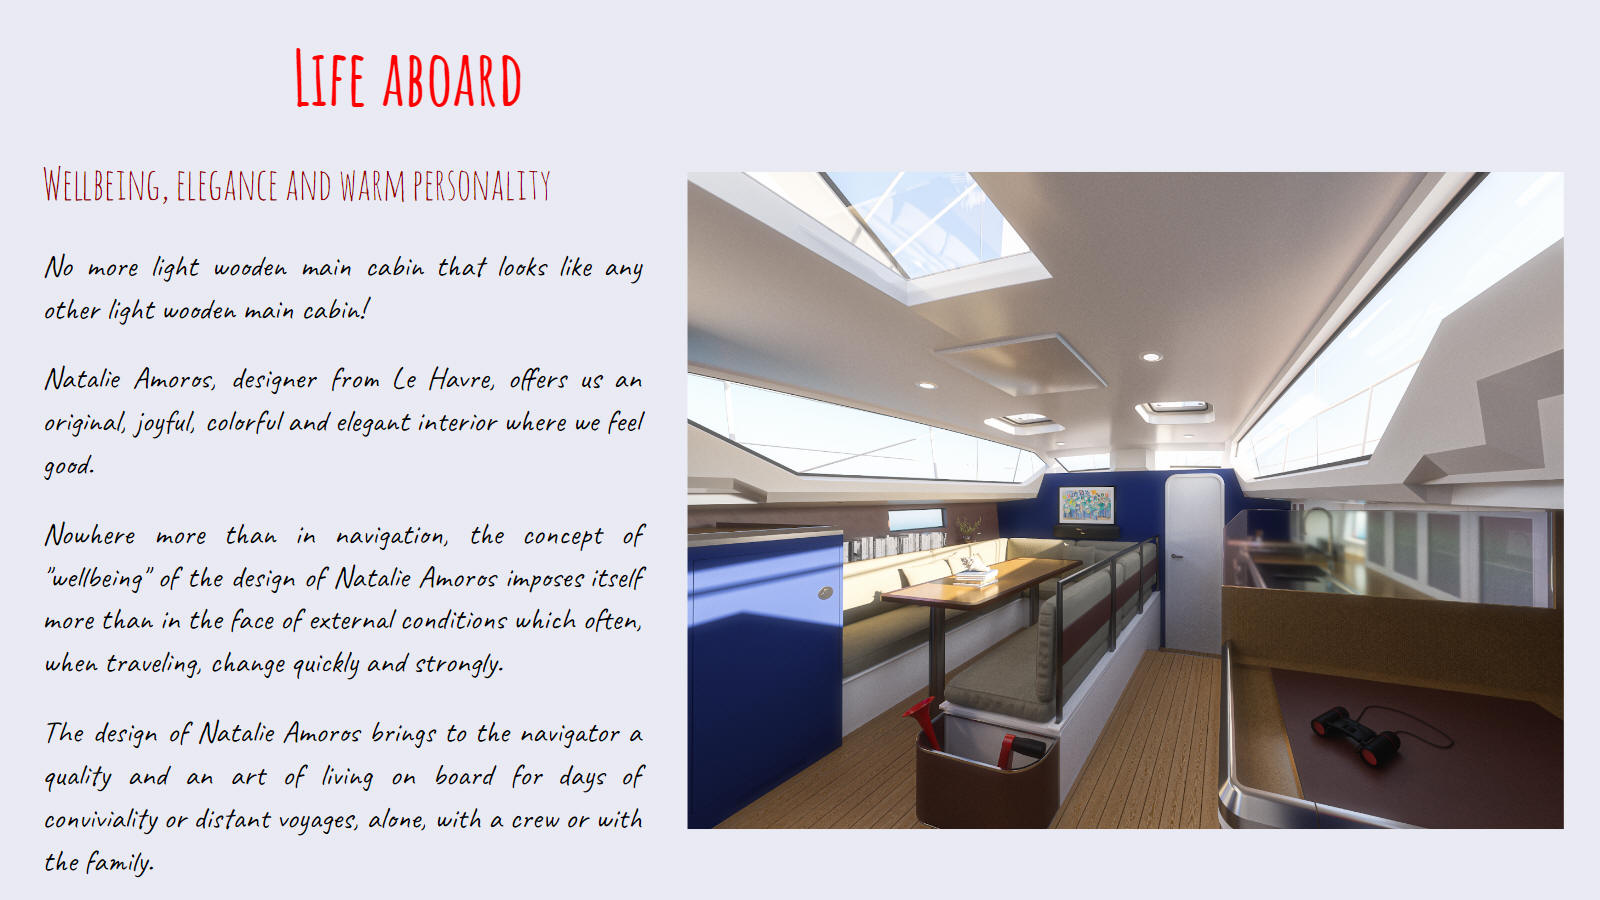 Arsouin 40 hybrid electric sailboat, Wellness, elegance and warm personality